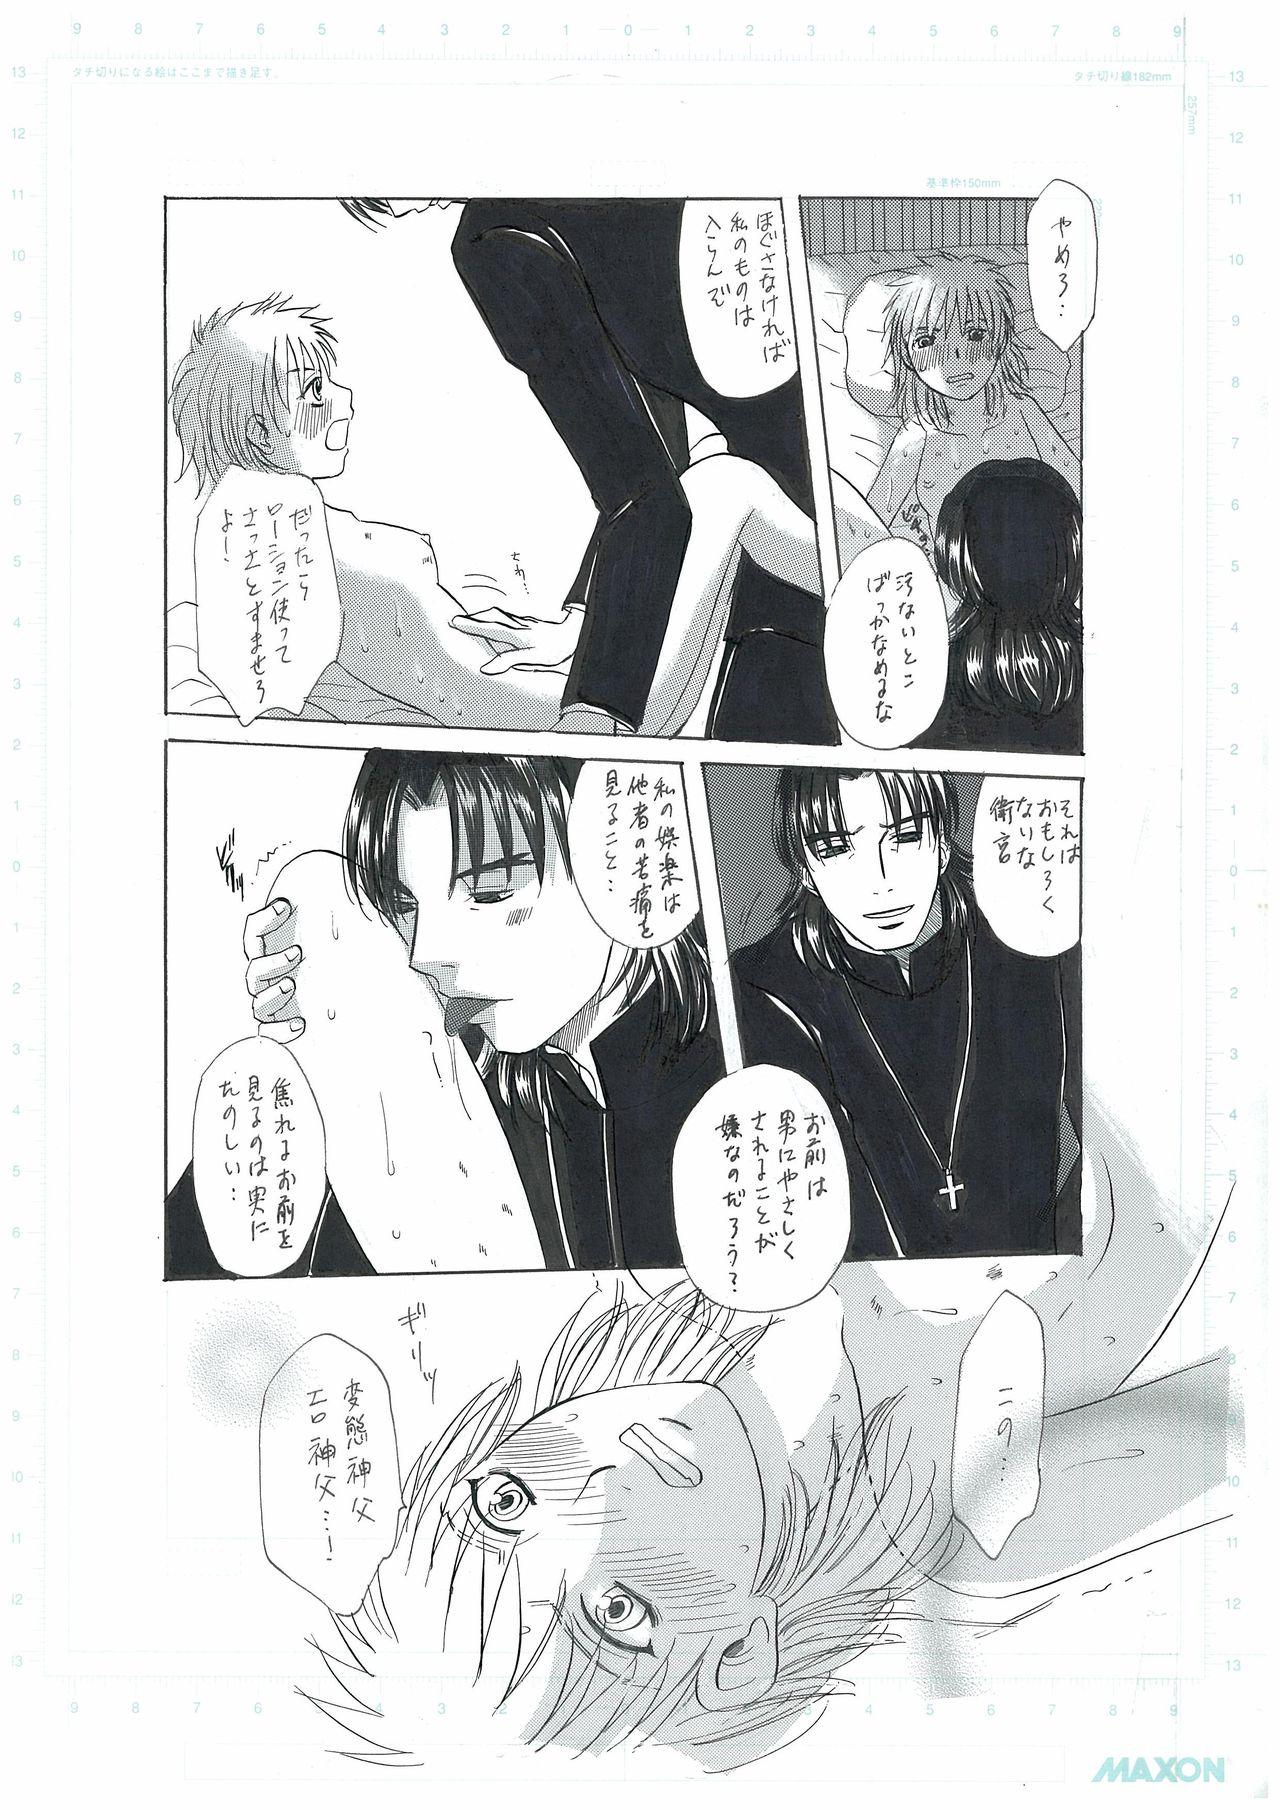 Dominate 彼女の願い - Fate stay night Bottom - Page 9